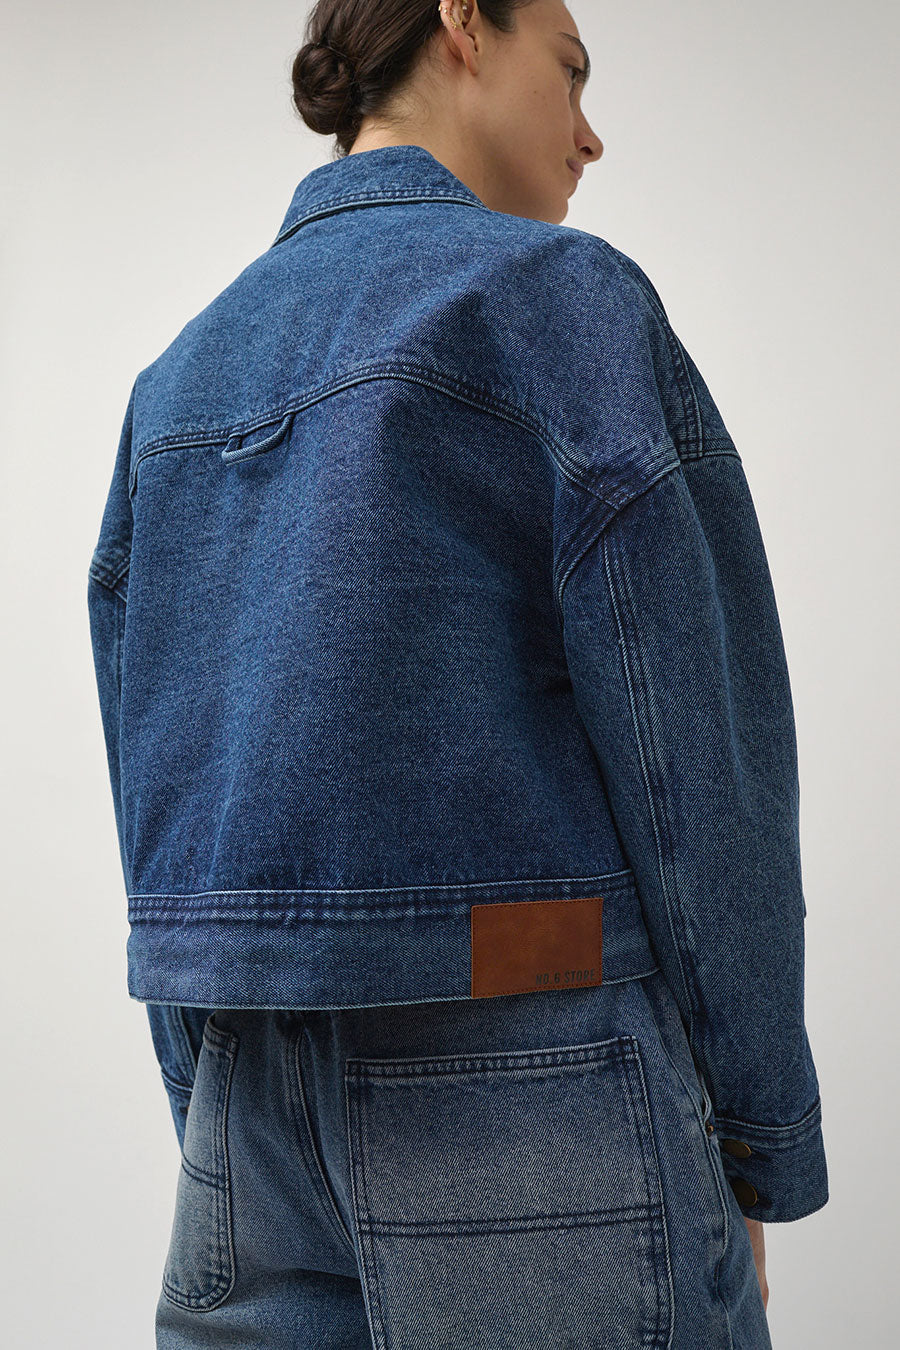 We Are The Others | The Stud Denim Jacket - Light Blue Wash